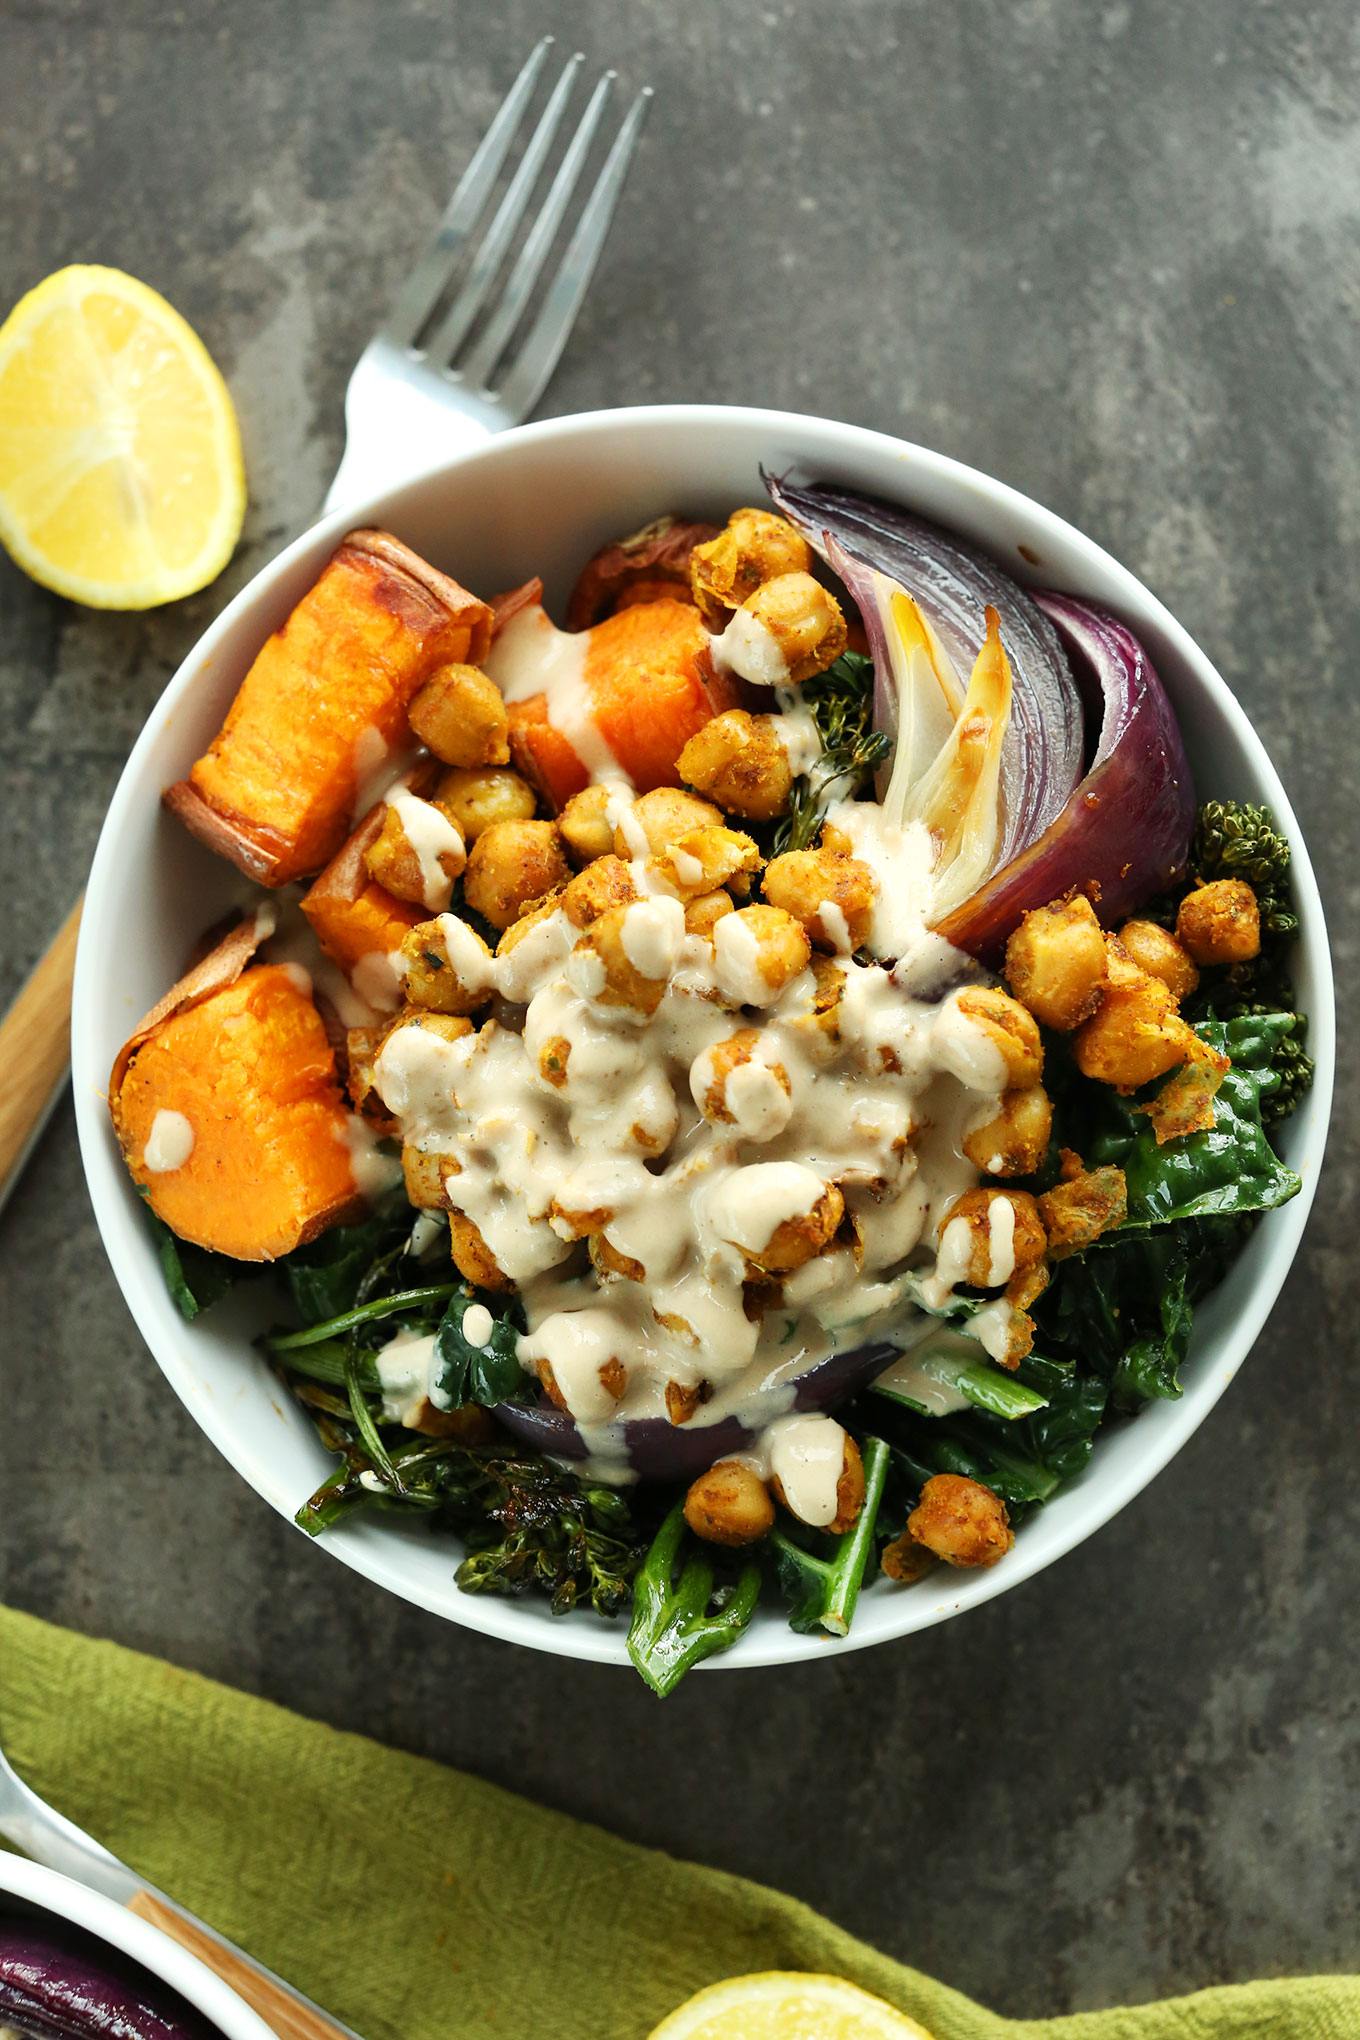 30-minute-CHICKPEA-Sweet-Potato-BUDDHA-Bowls-A-complete-meal-packed-with-protein-fiber-and-healthy-fats-with-a-STELLAR-Tahini-Lemon-Maple-Sauce-vegan-glutenfree-healthy